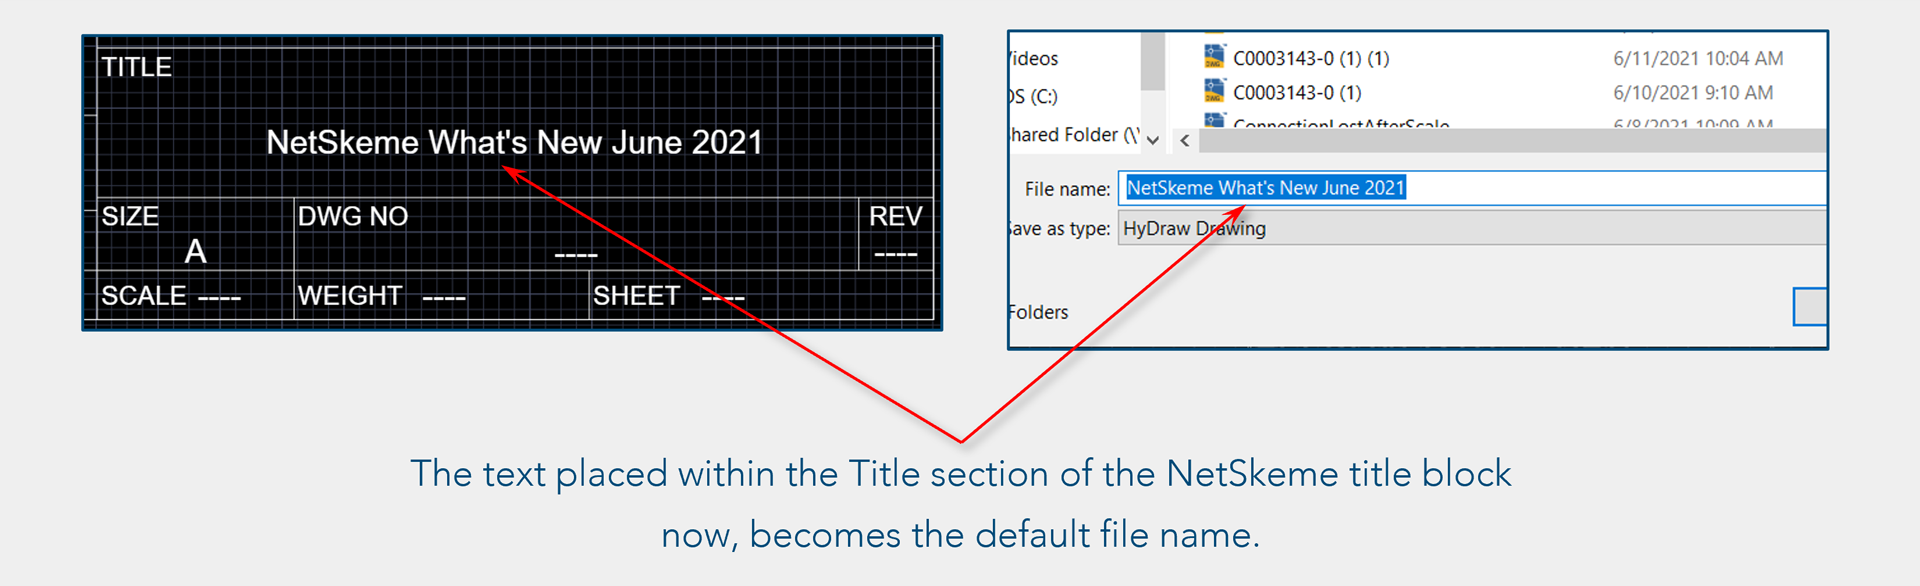 210600-NetSkeme--Automatic-Naming-of-File.png